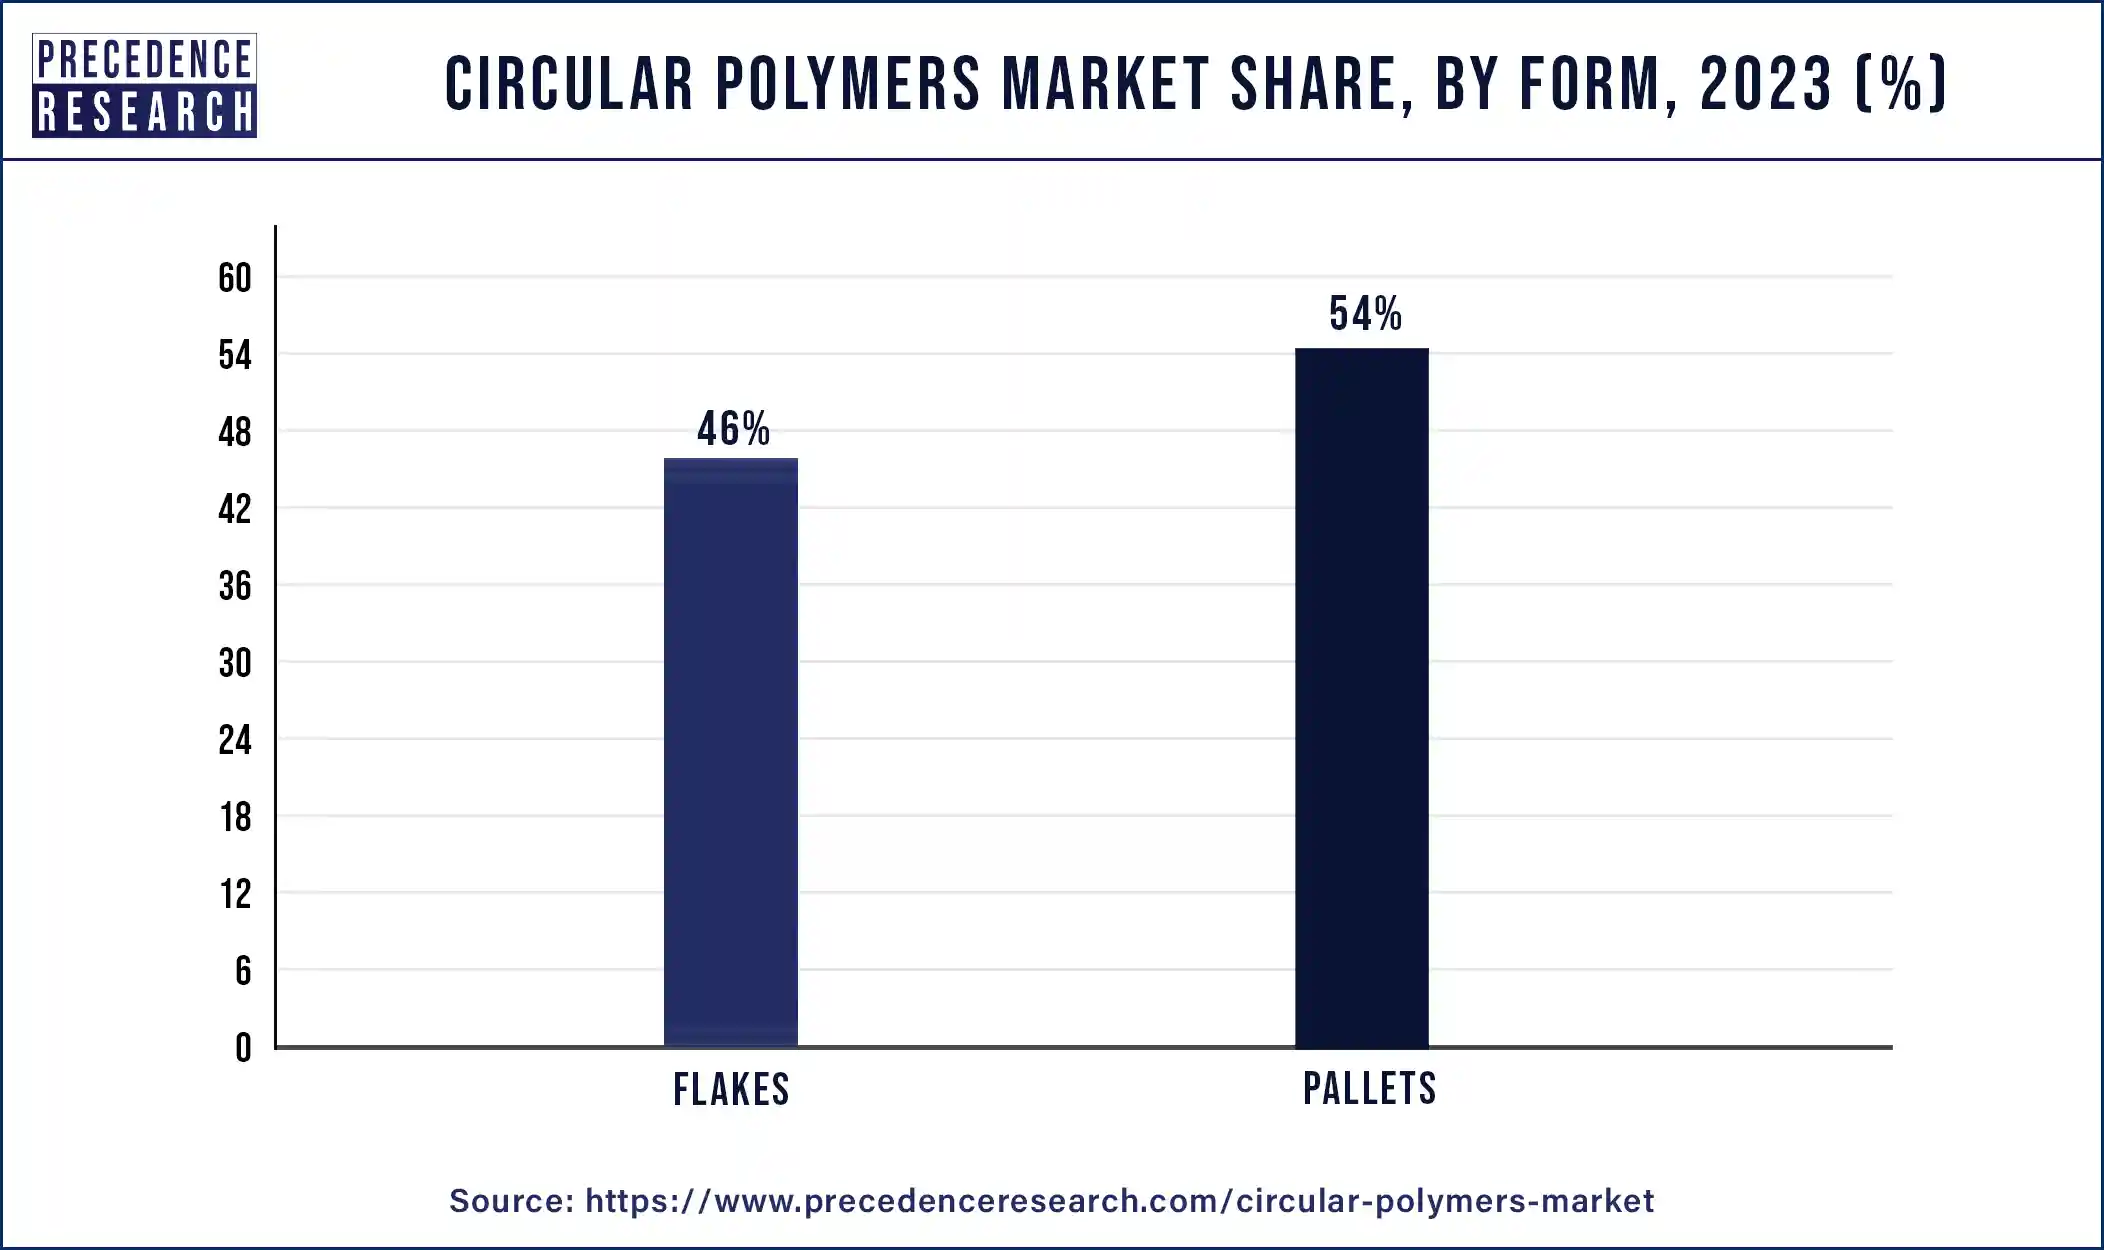 Circular Polymers Market Share, By Form, 2023 (%)